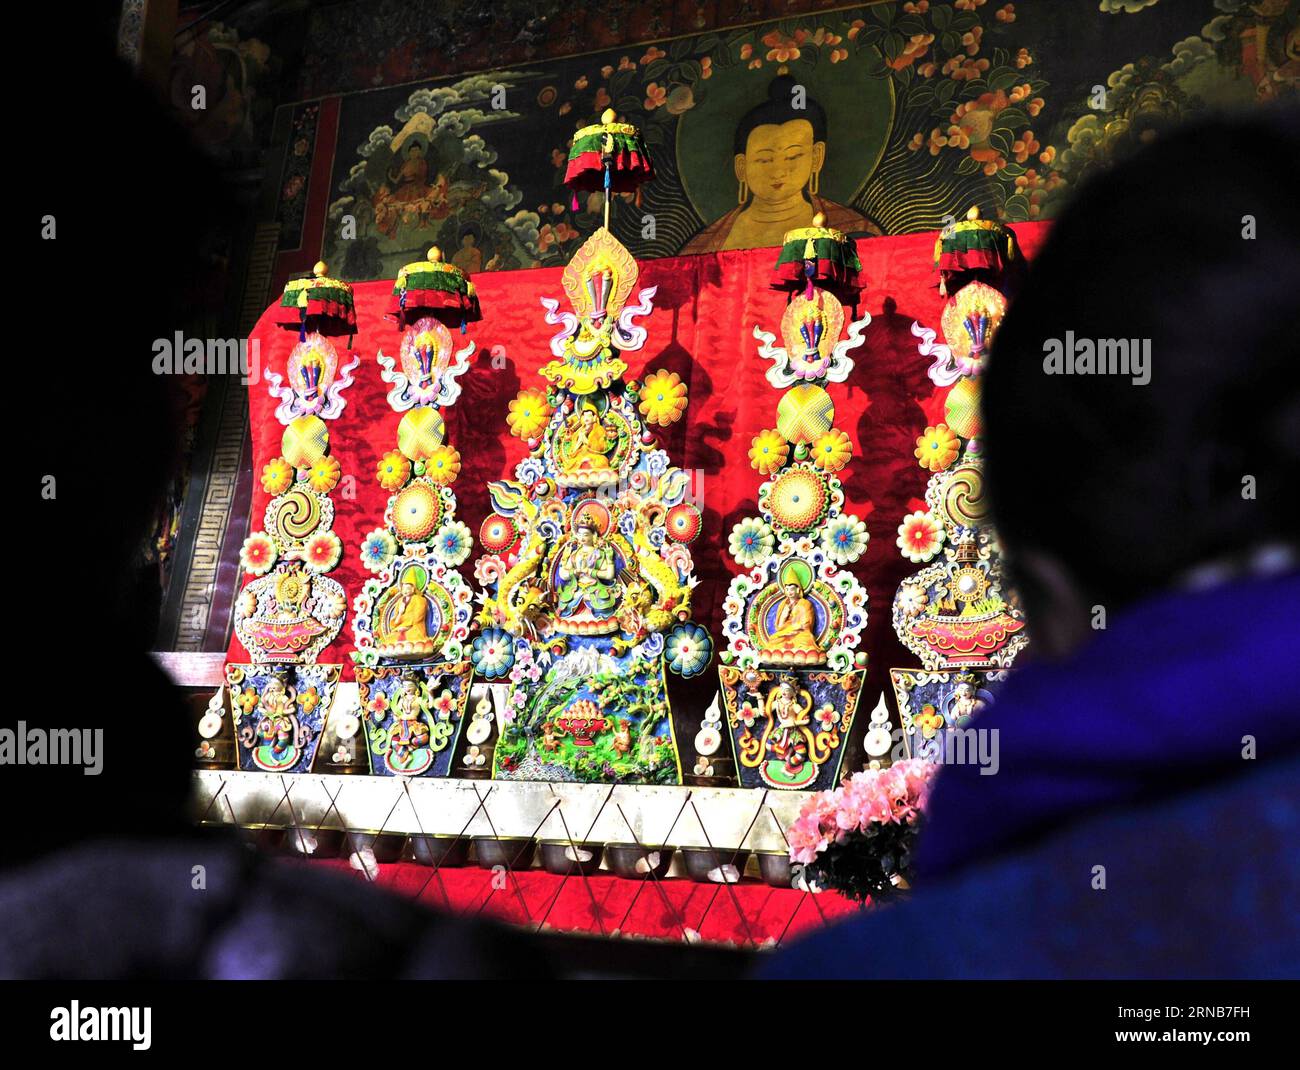 (160222) -- LHASA, Feb. 22, 2016 -- Butter sculptures made by Buddhists are seen at Jokhang Temple in Lhasa, capital of southwest China s Tibet Autonomous Region, Feb. 22, 2016. ) (dhf) CHINA-TIBET-JOKHANG TEMPLE-BUTTER SCULPTURE (CN) JigmexDorje PUBLICATIONxNOTxINxCHN   Lhasa Feb 22 2016 Butter Sculptures Made by Buddhists are Lakes AT Jokhang Temple in Lhasa Capital of Southwest China S Tibet Autonomous Region Feb 22 2016 DHF China Tibet Jokhang Temple Butter Sculpture CN JigmexDorje PUBLICATIONxNOTxINxCHN Stock Photo